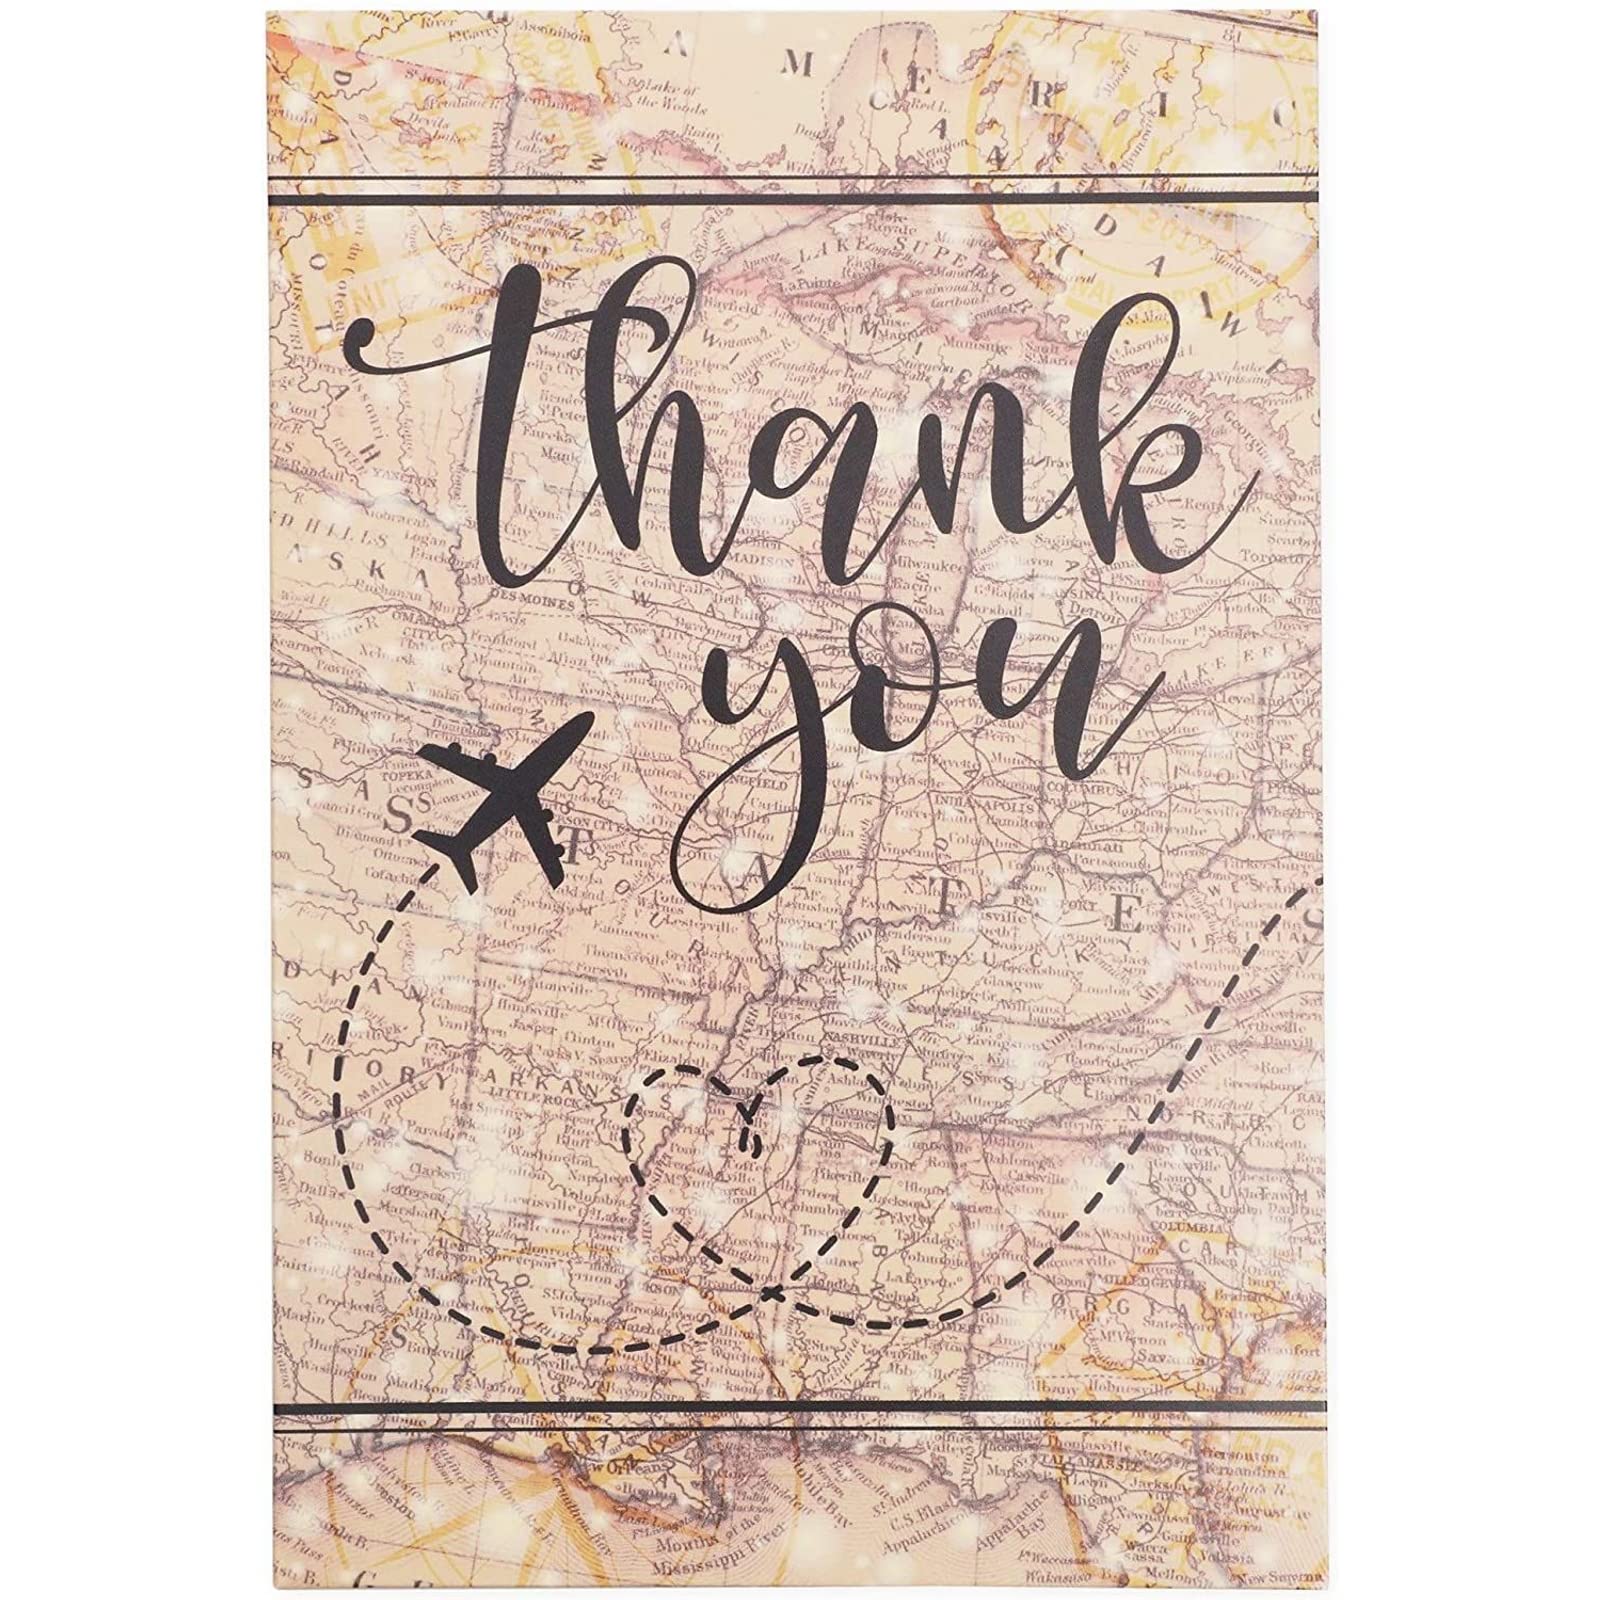 Pipilo Press 48 Pack Travel Thank You Cards with Envelopes, 4x6 Notecards with Airplane, Map, and Adventure Design (Brown)